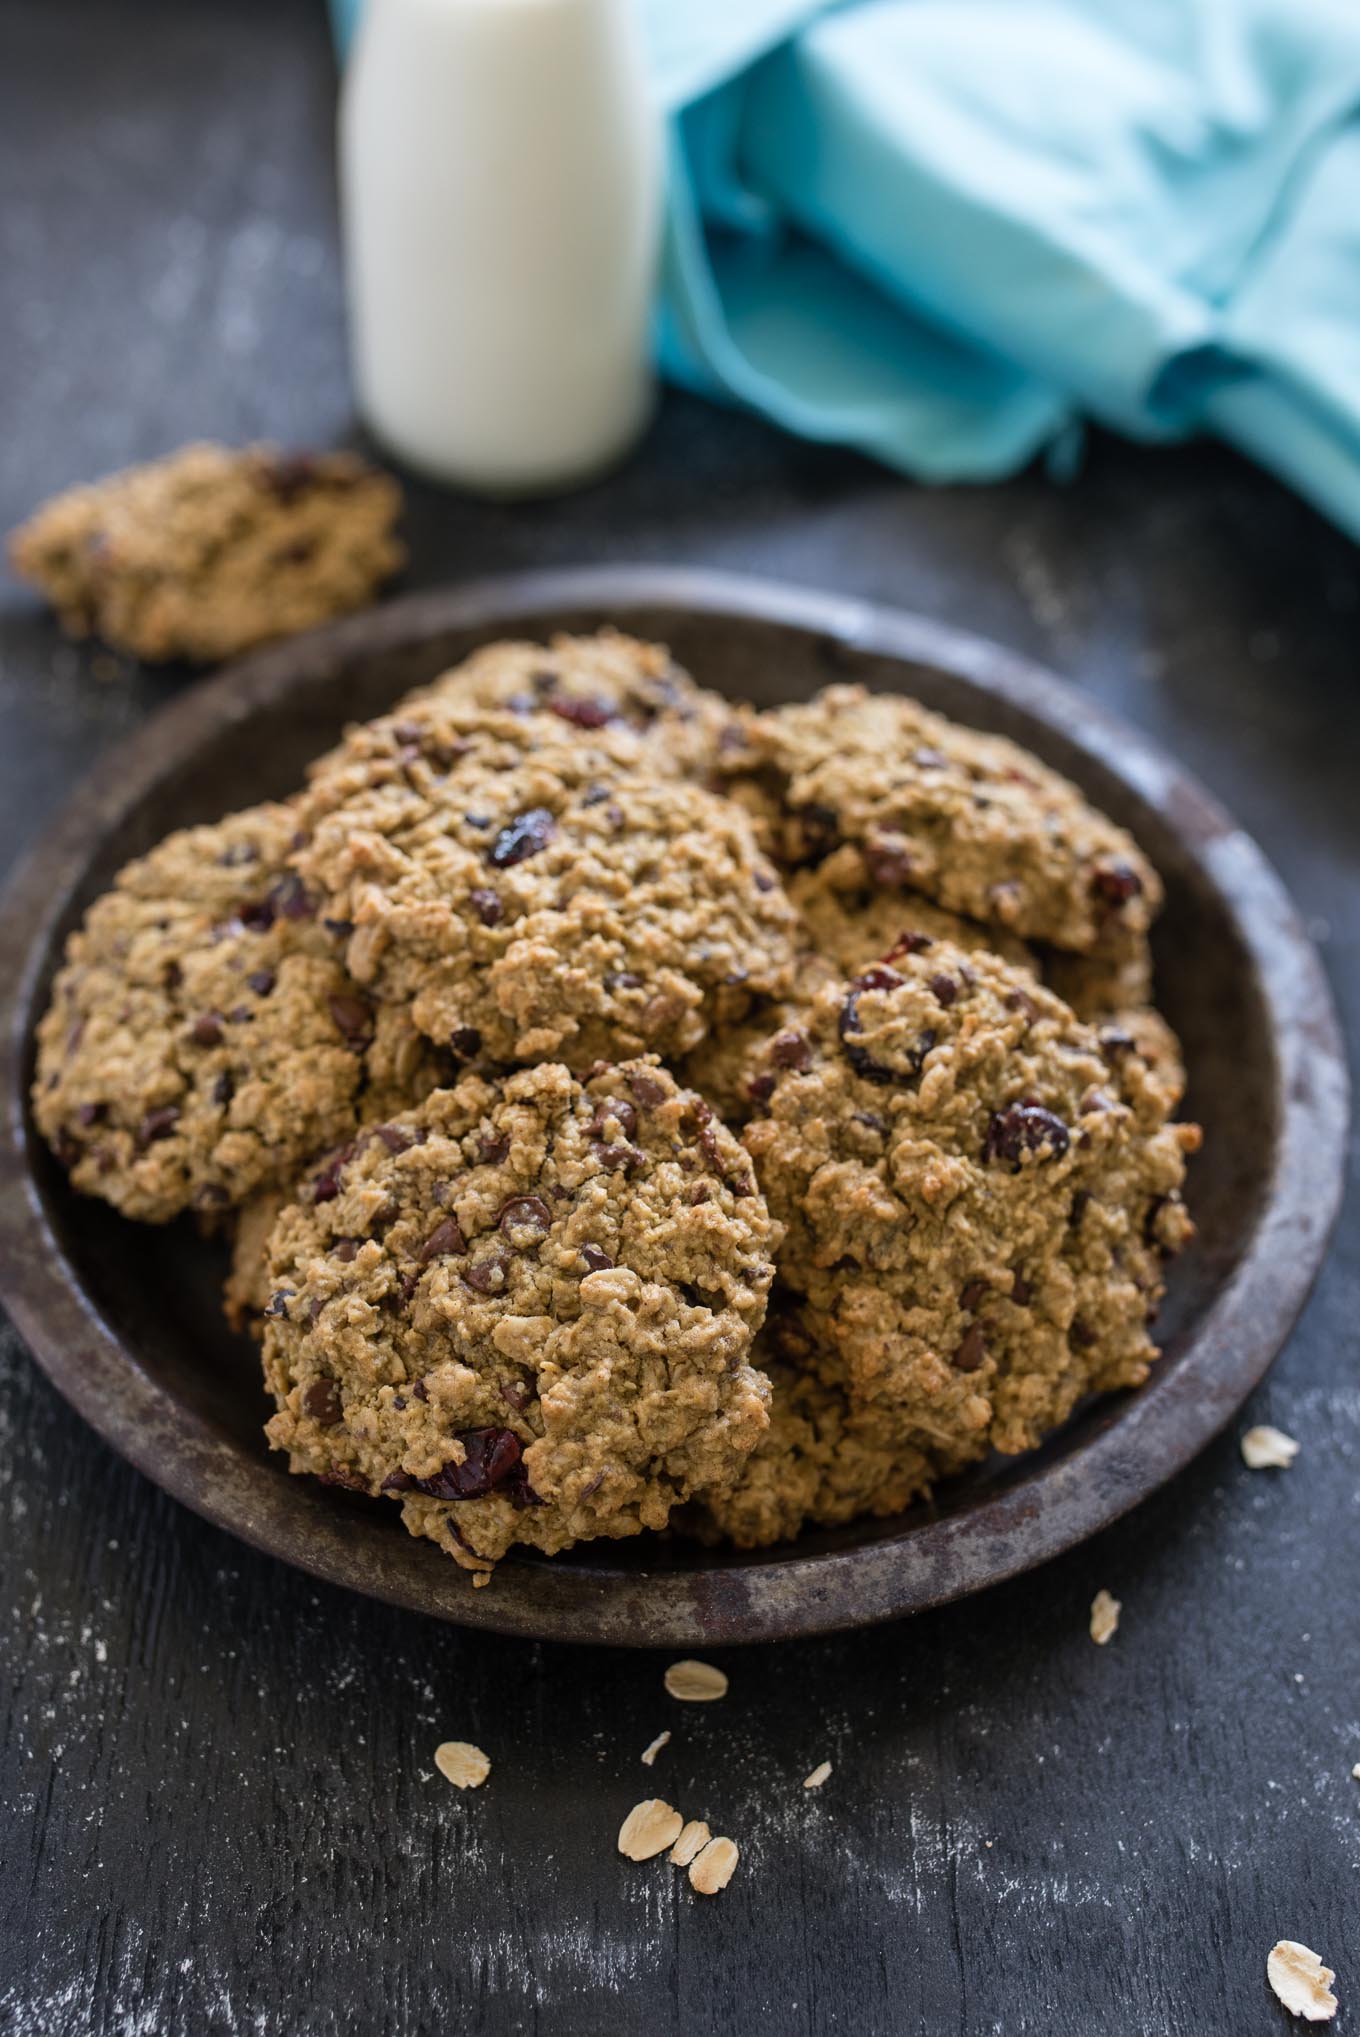 Lunch Box Cookies are both nutritious and delicious- a hearty soft cookie packed with oats, chocolate chips, cranberries , cocoa nibs and reduced amounts of sugar and oil.